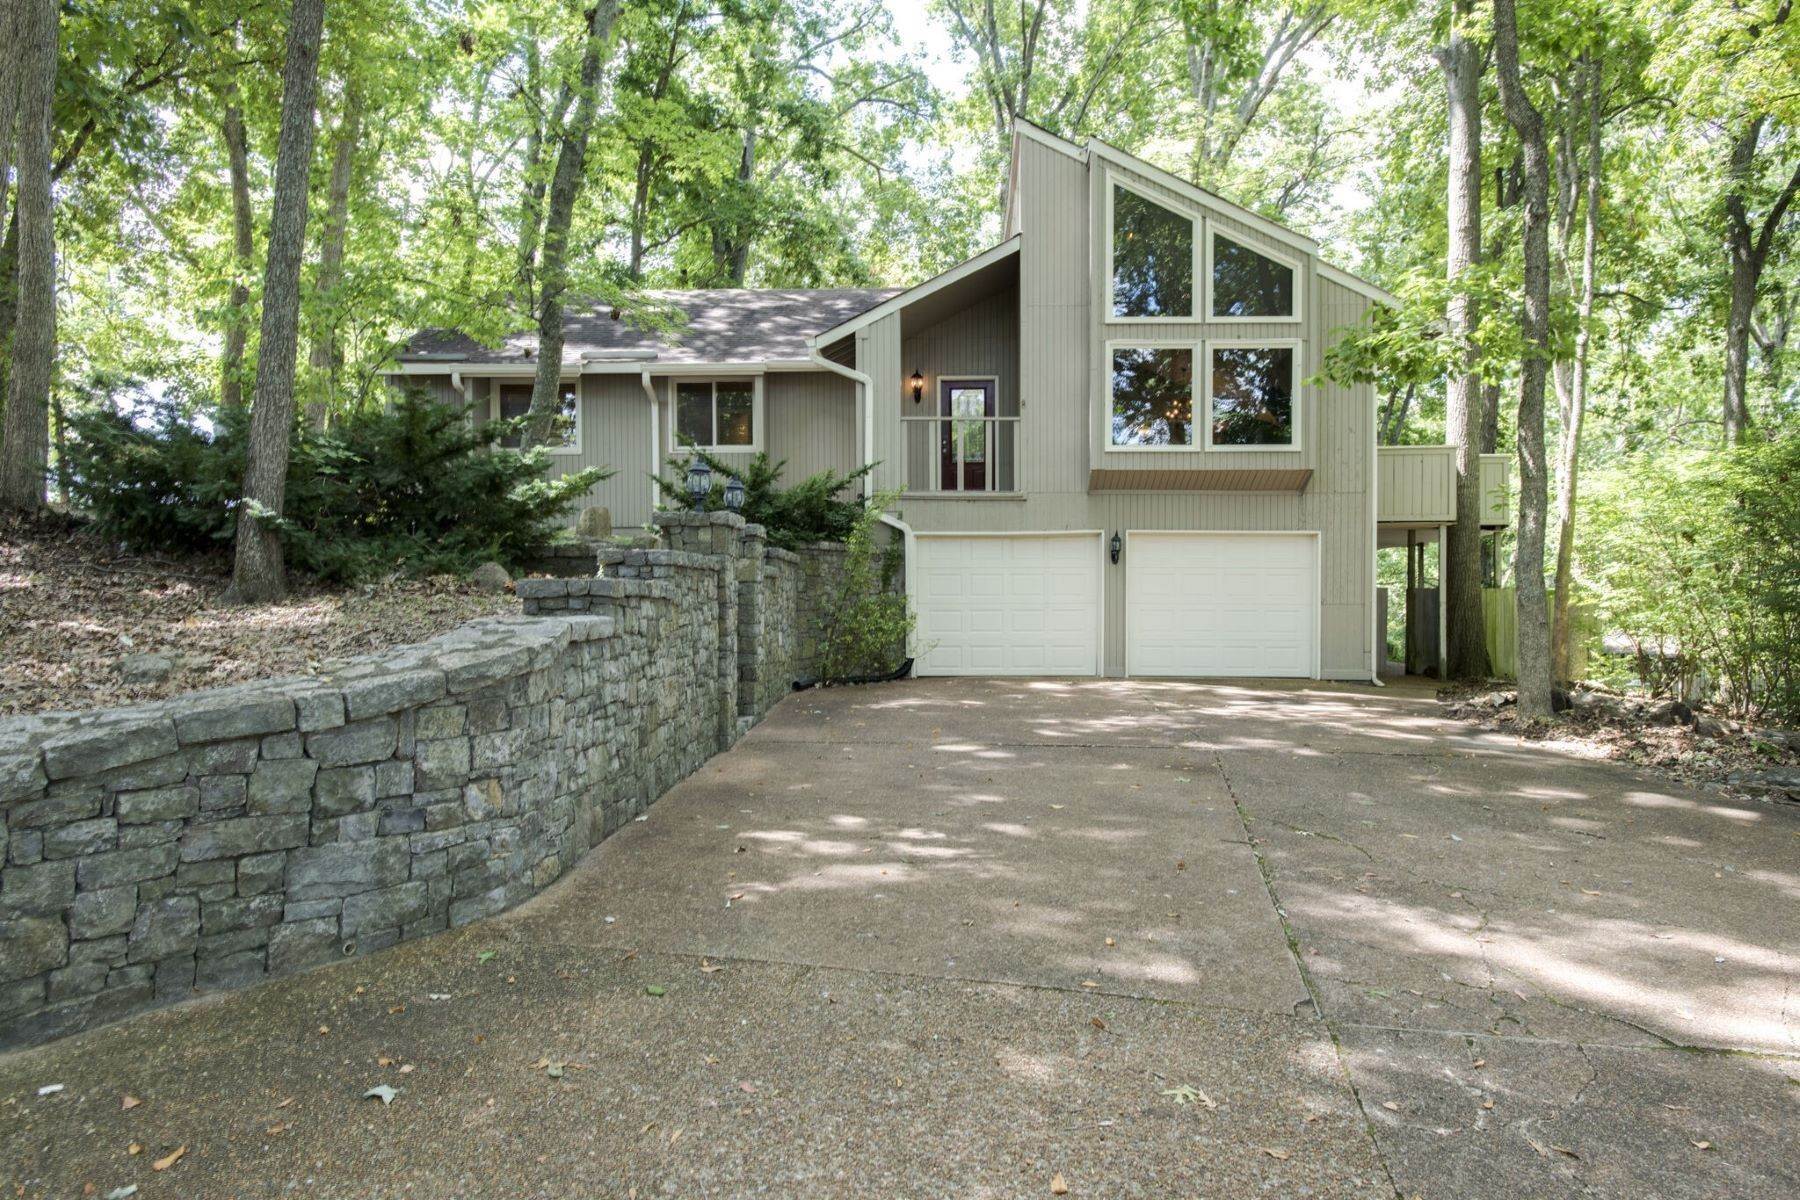 Property for Sale at 657 Sneed Rd W W, Franklin, TN, 37069 657 Sneed Rd W W Franklin, Tennessee 37069 United States